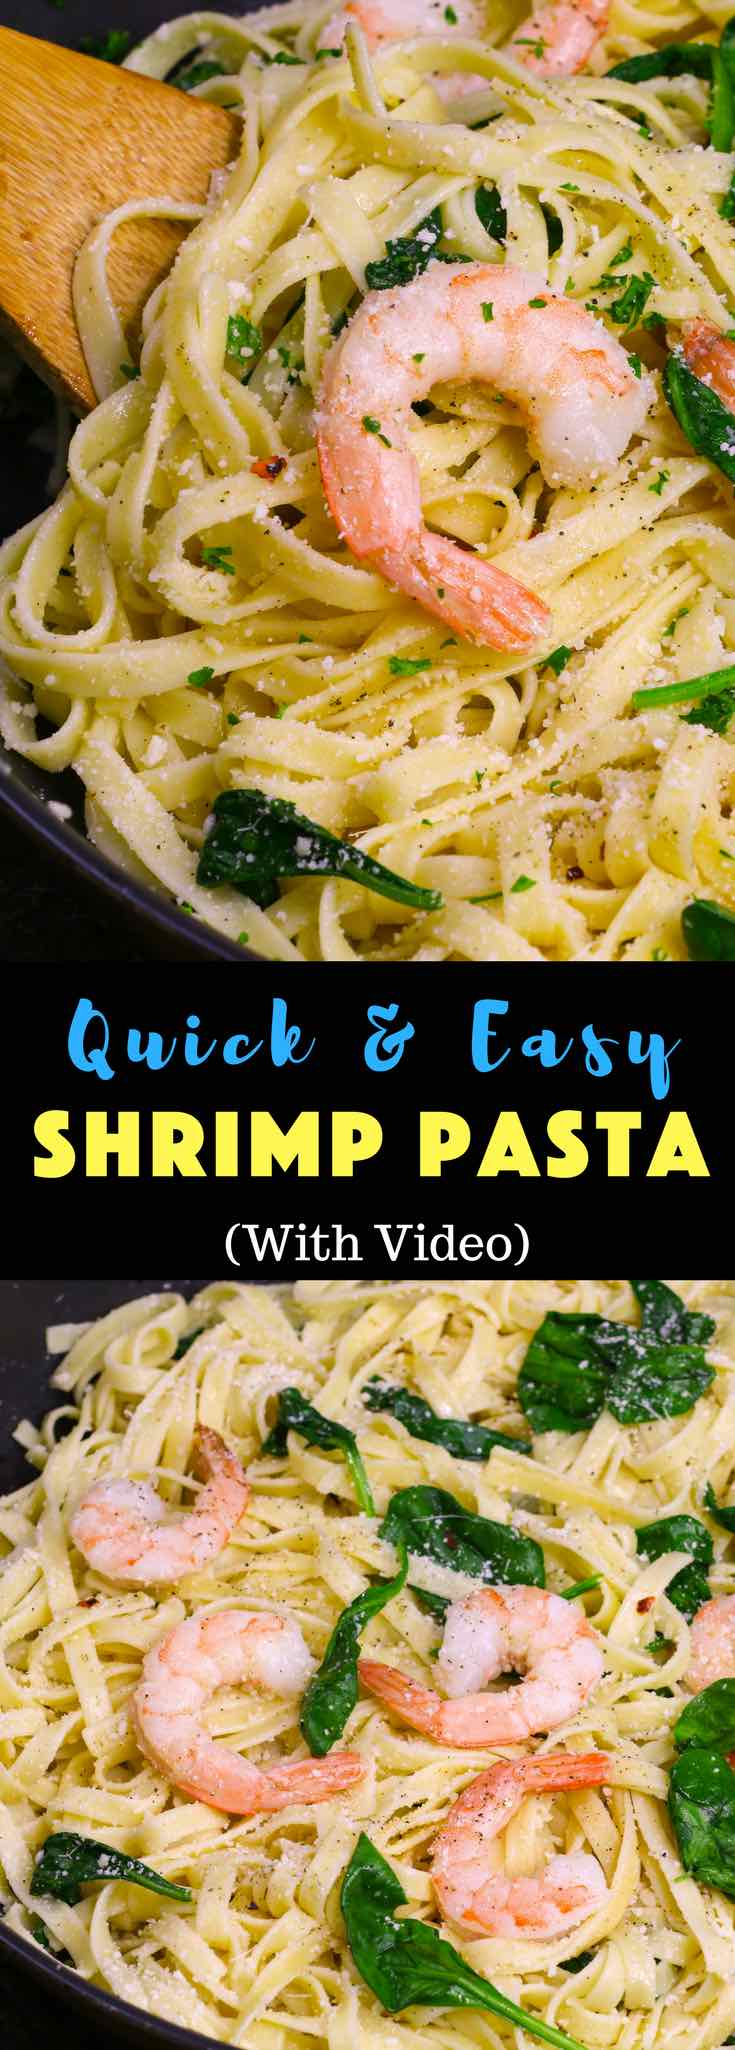 This Garlic Butter Shrimp Pasta is a simple and incredibly delicious one pot meal you can make in under 30 minutes. It’s a quick and easy dish that’s restaurant quality. Plus recipe video tutorial! #ShrimpPasta